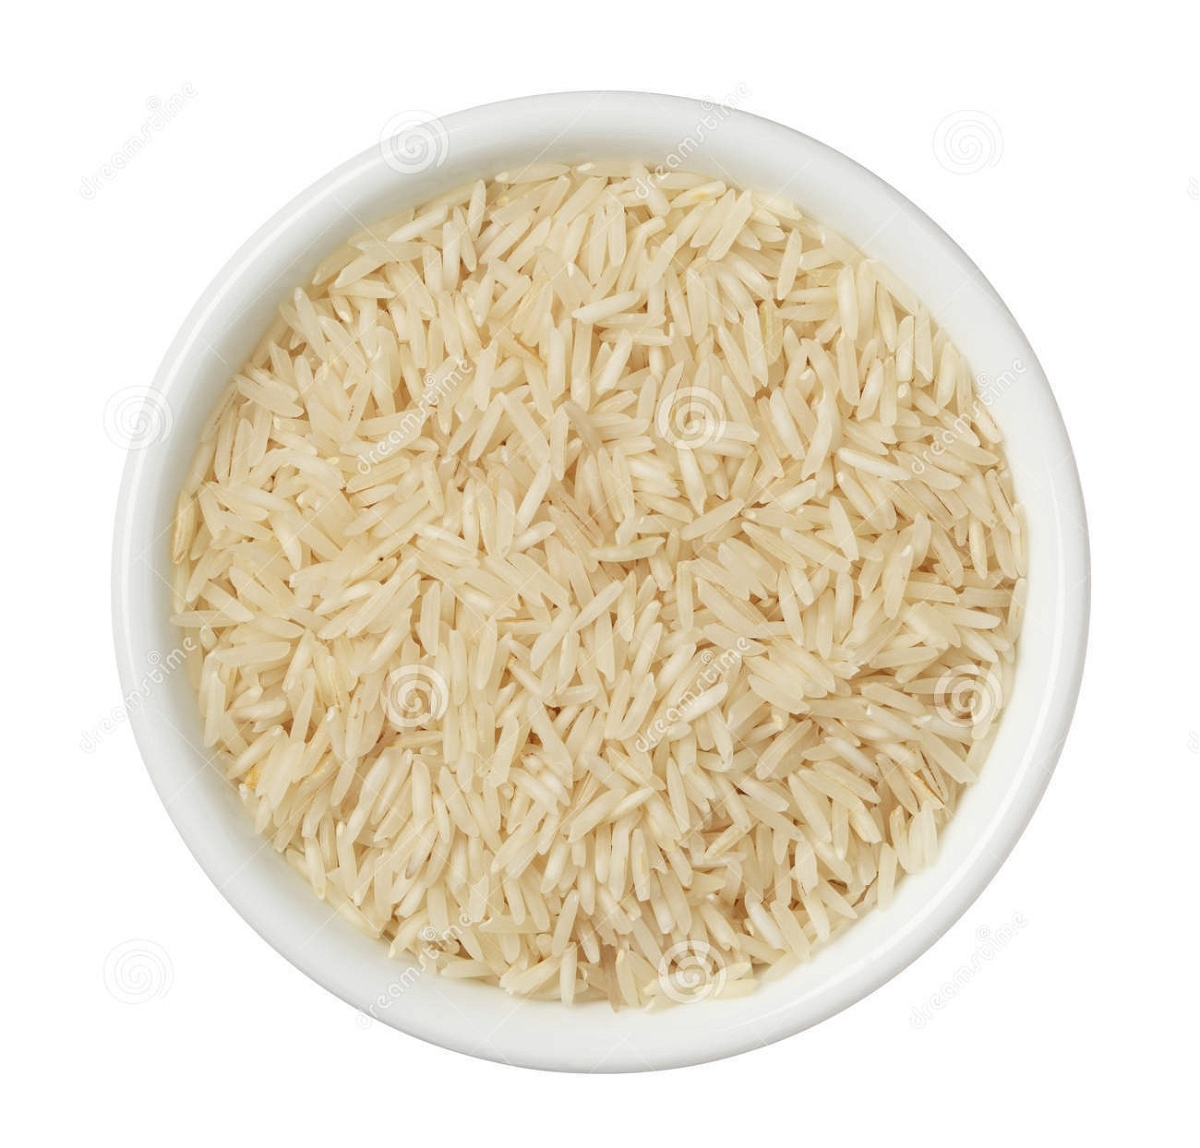 https://cdn.shpy.in/27189/1651062526453_basmati-rice-bowl-isolated-white-background-29384947.png?width=1200